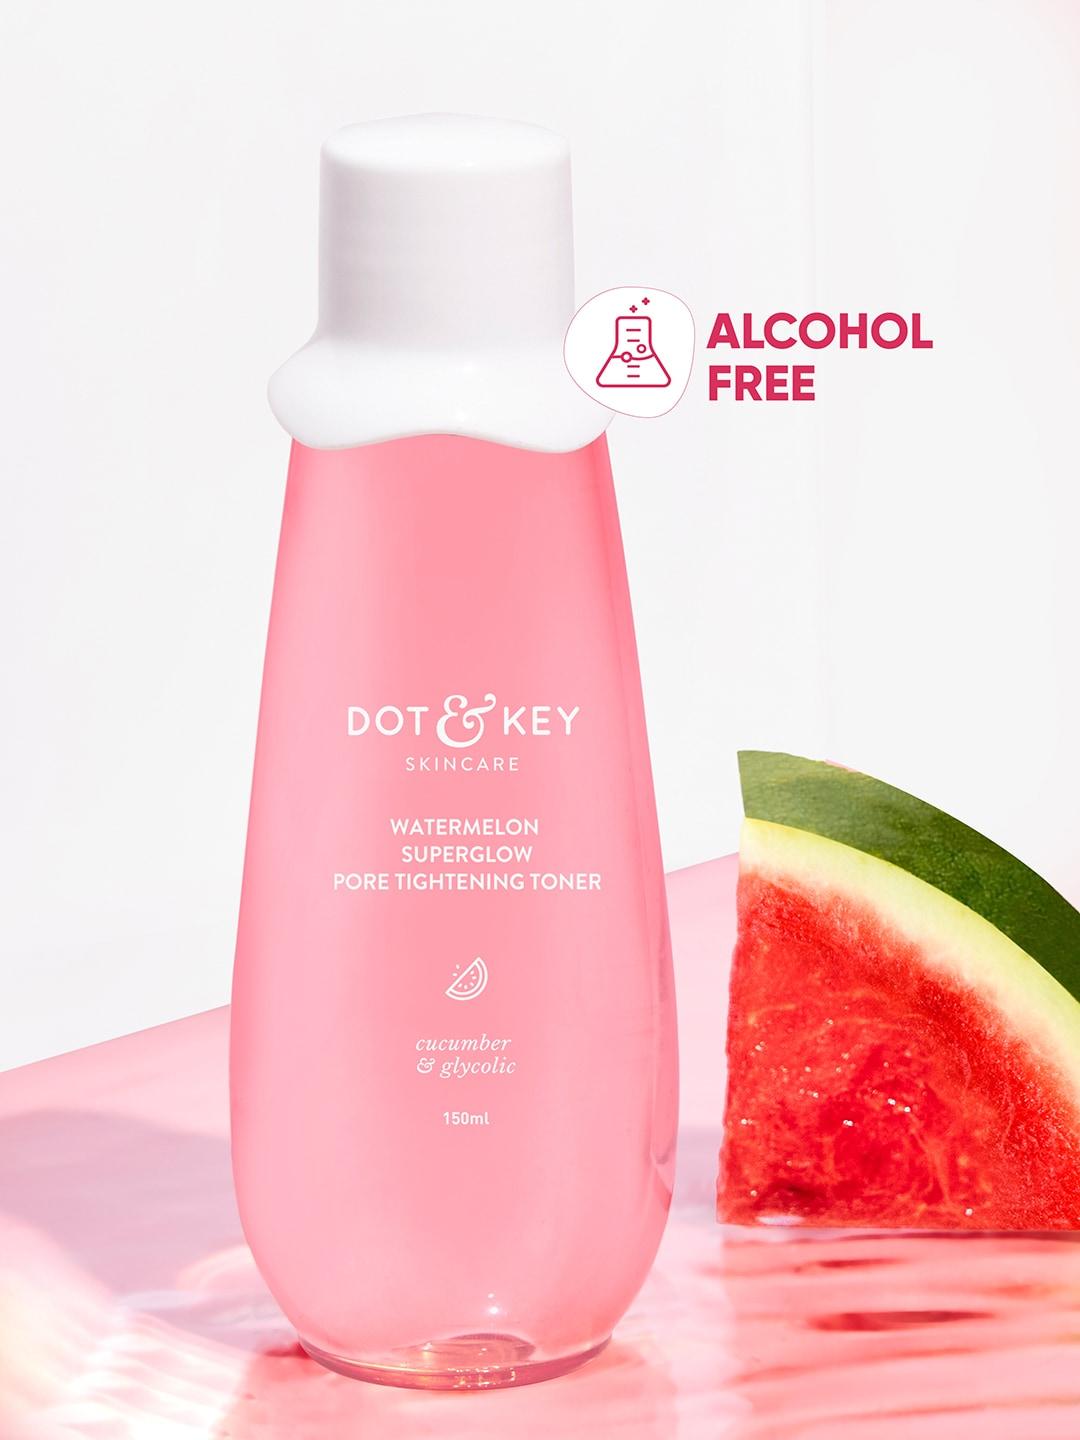 dot-&-key-watermelon-aha-pore-tightening-toner-with-glycolic-for-glowing-skin---150ml